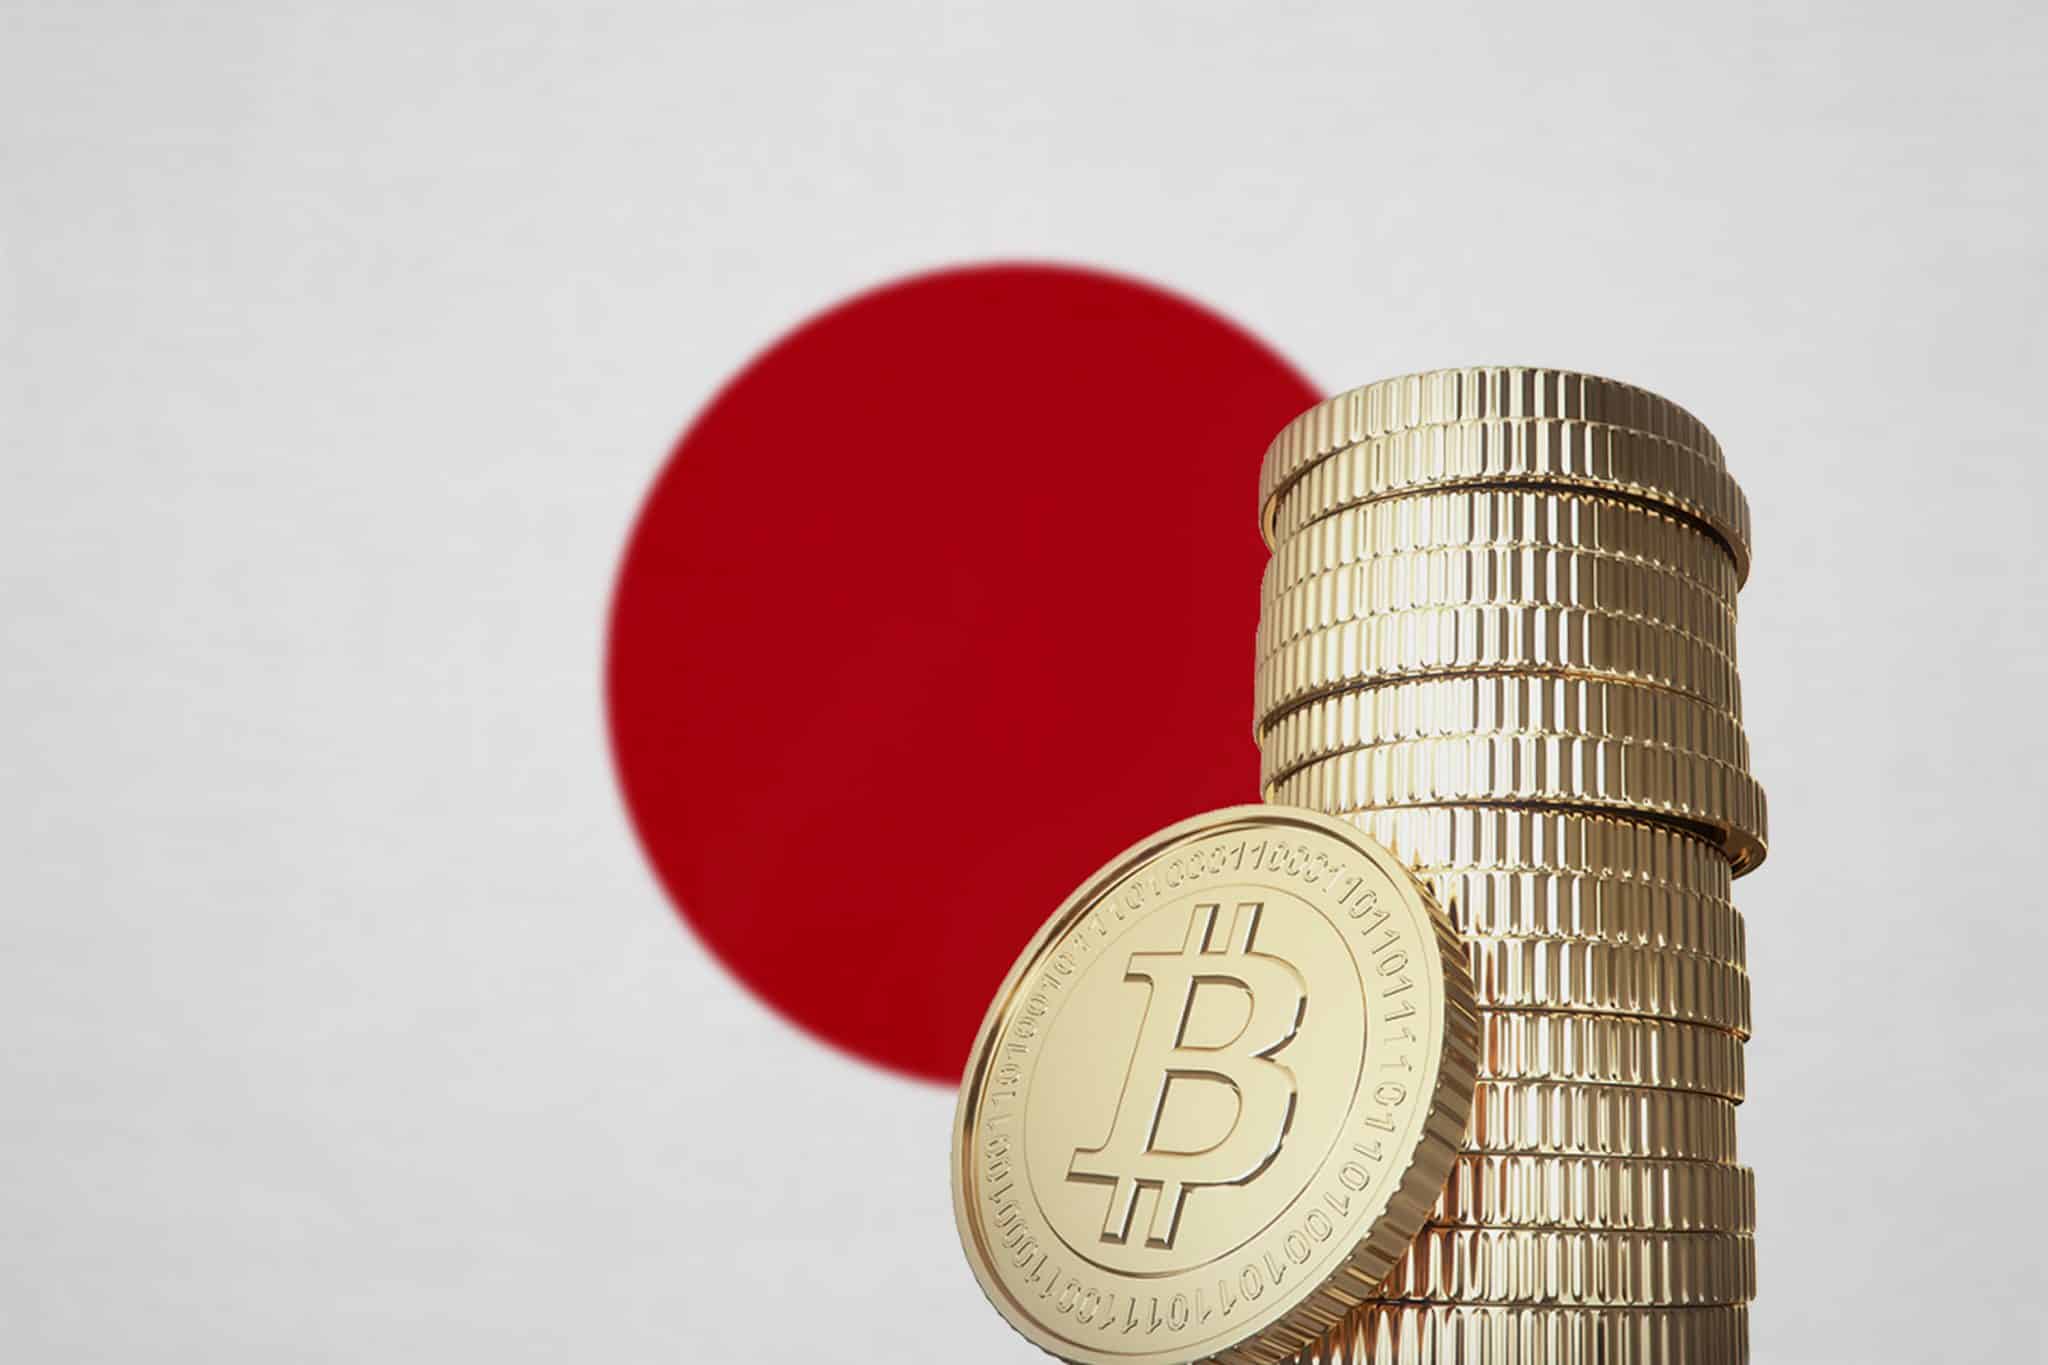 Japanese Yen at its Lowest Level in 34 Years: What Happens to Bitcoin and Cryptocurrency Prices if Japan Intervenes?